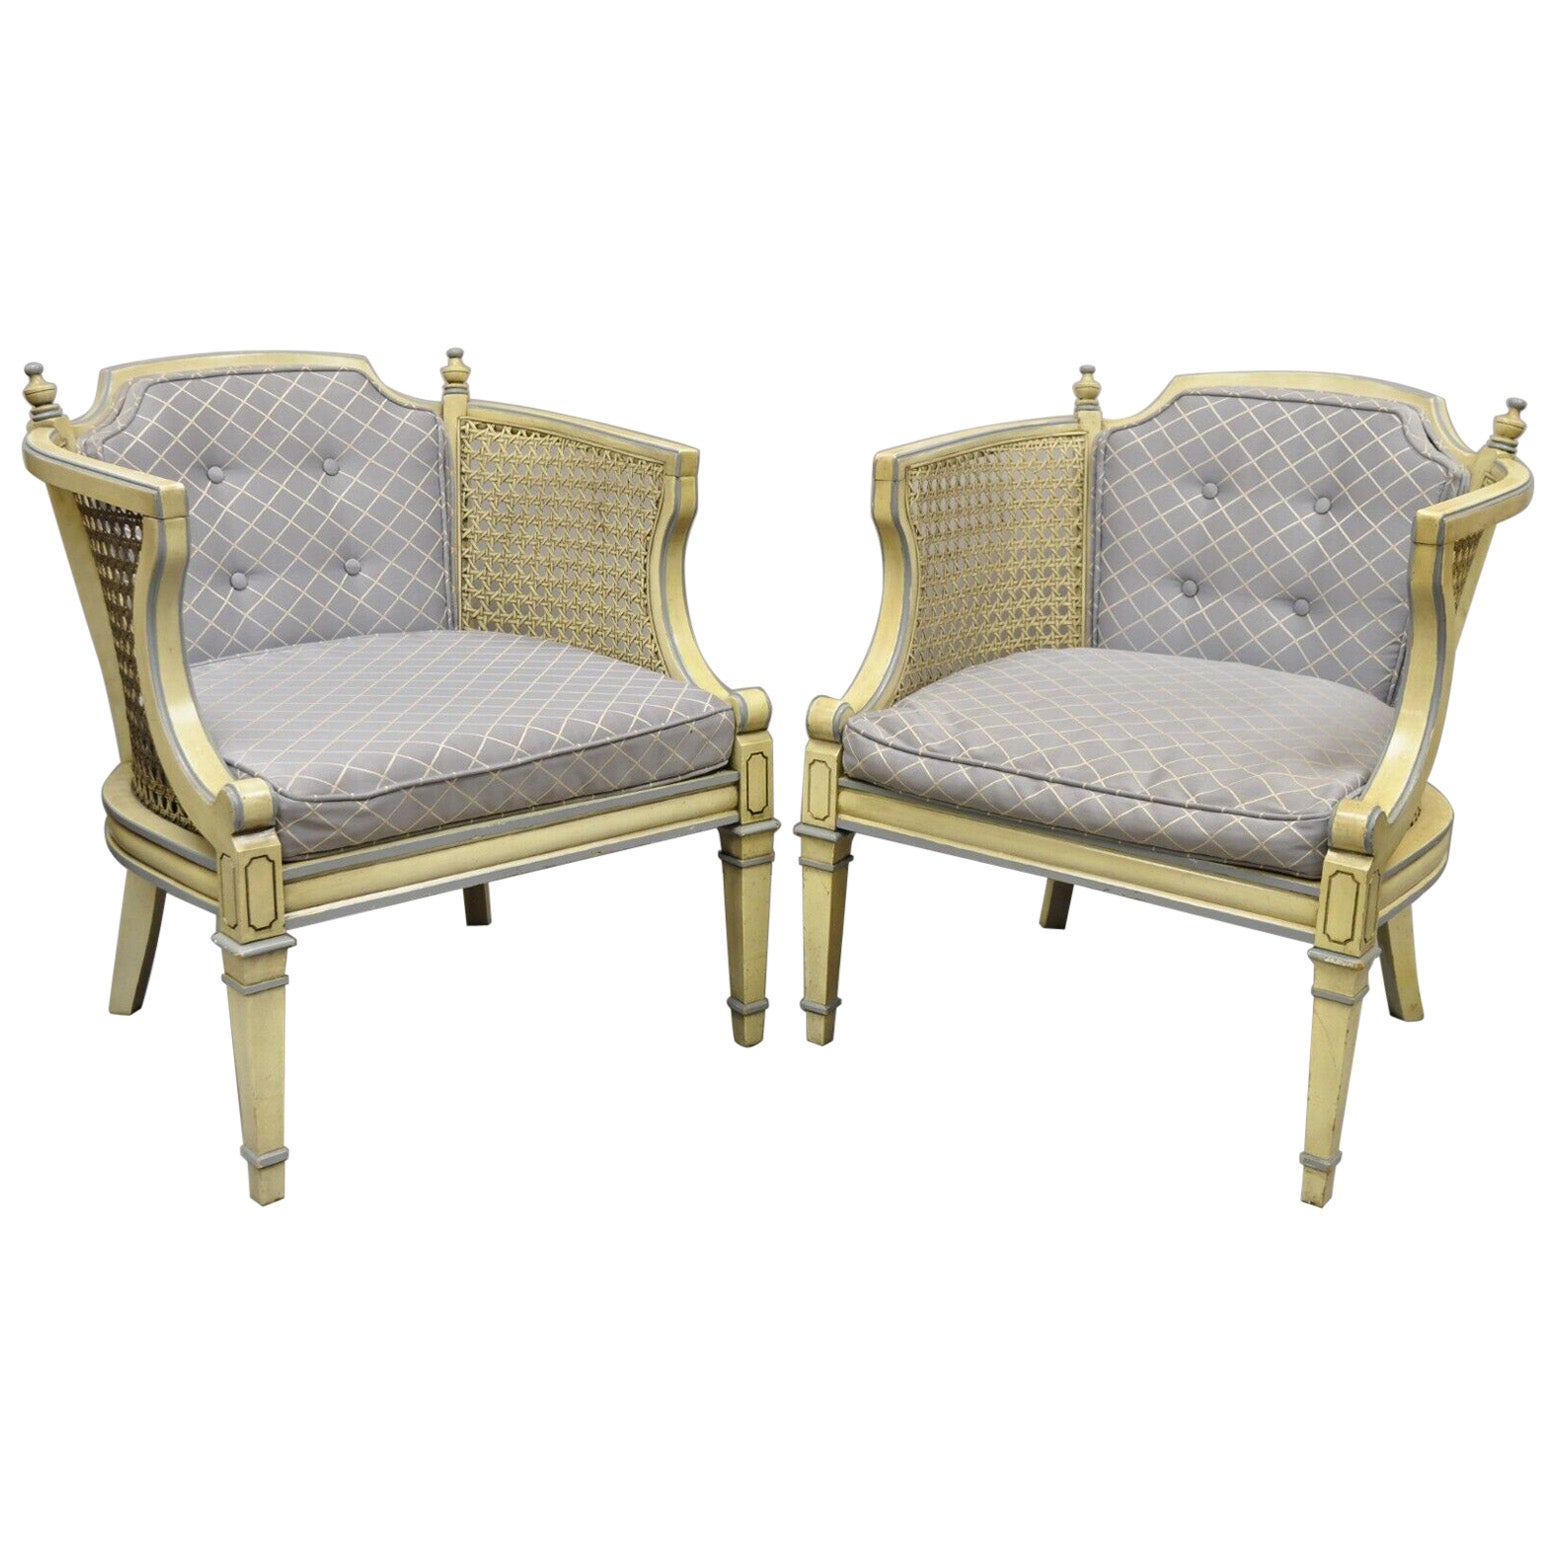 Vintage Hollywood Regency Cream Painted Cane Side Club Lounge Chairs, Pair For Sale